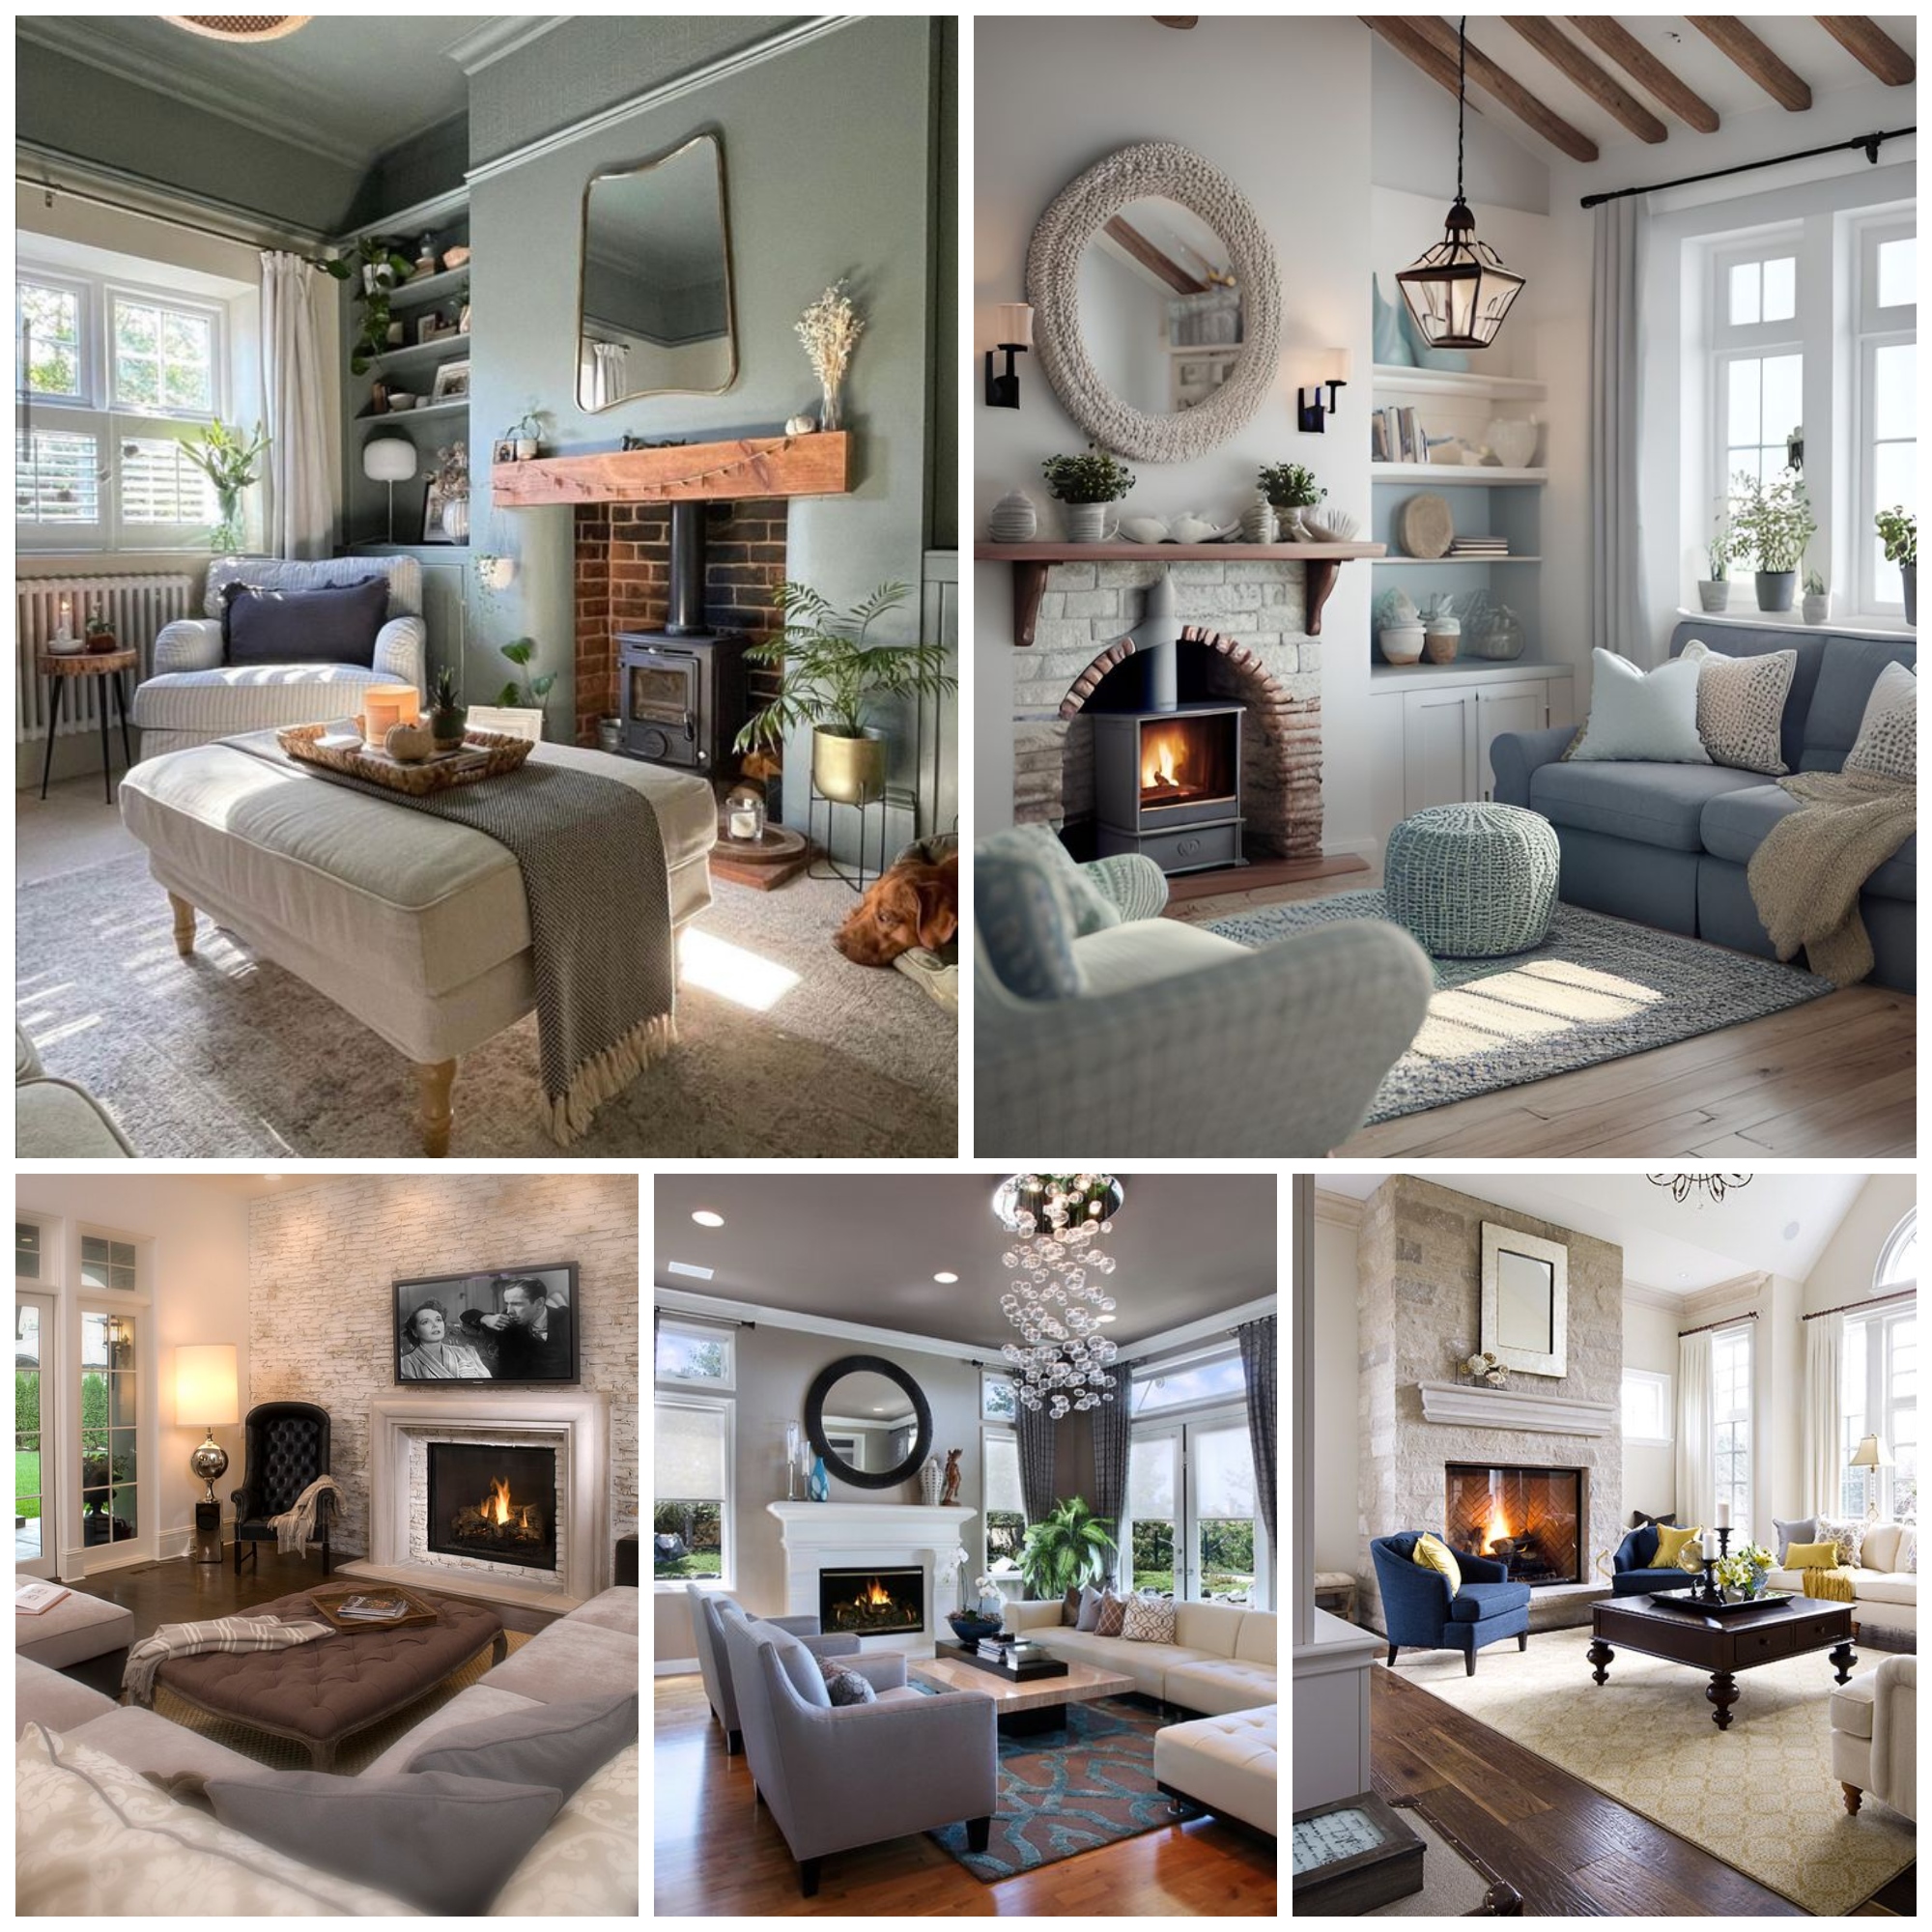 Cozy Fireplace Ideas to Steal